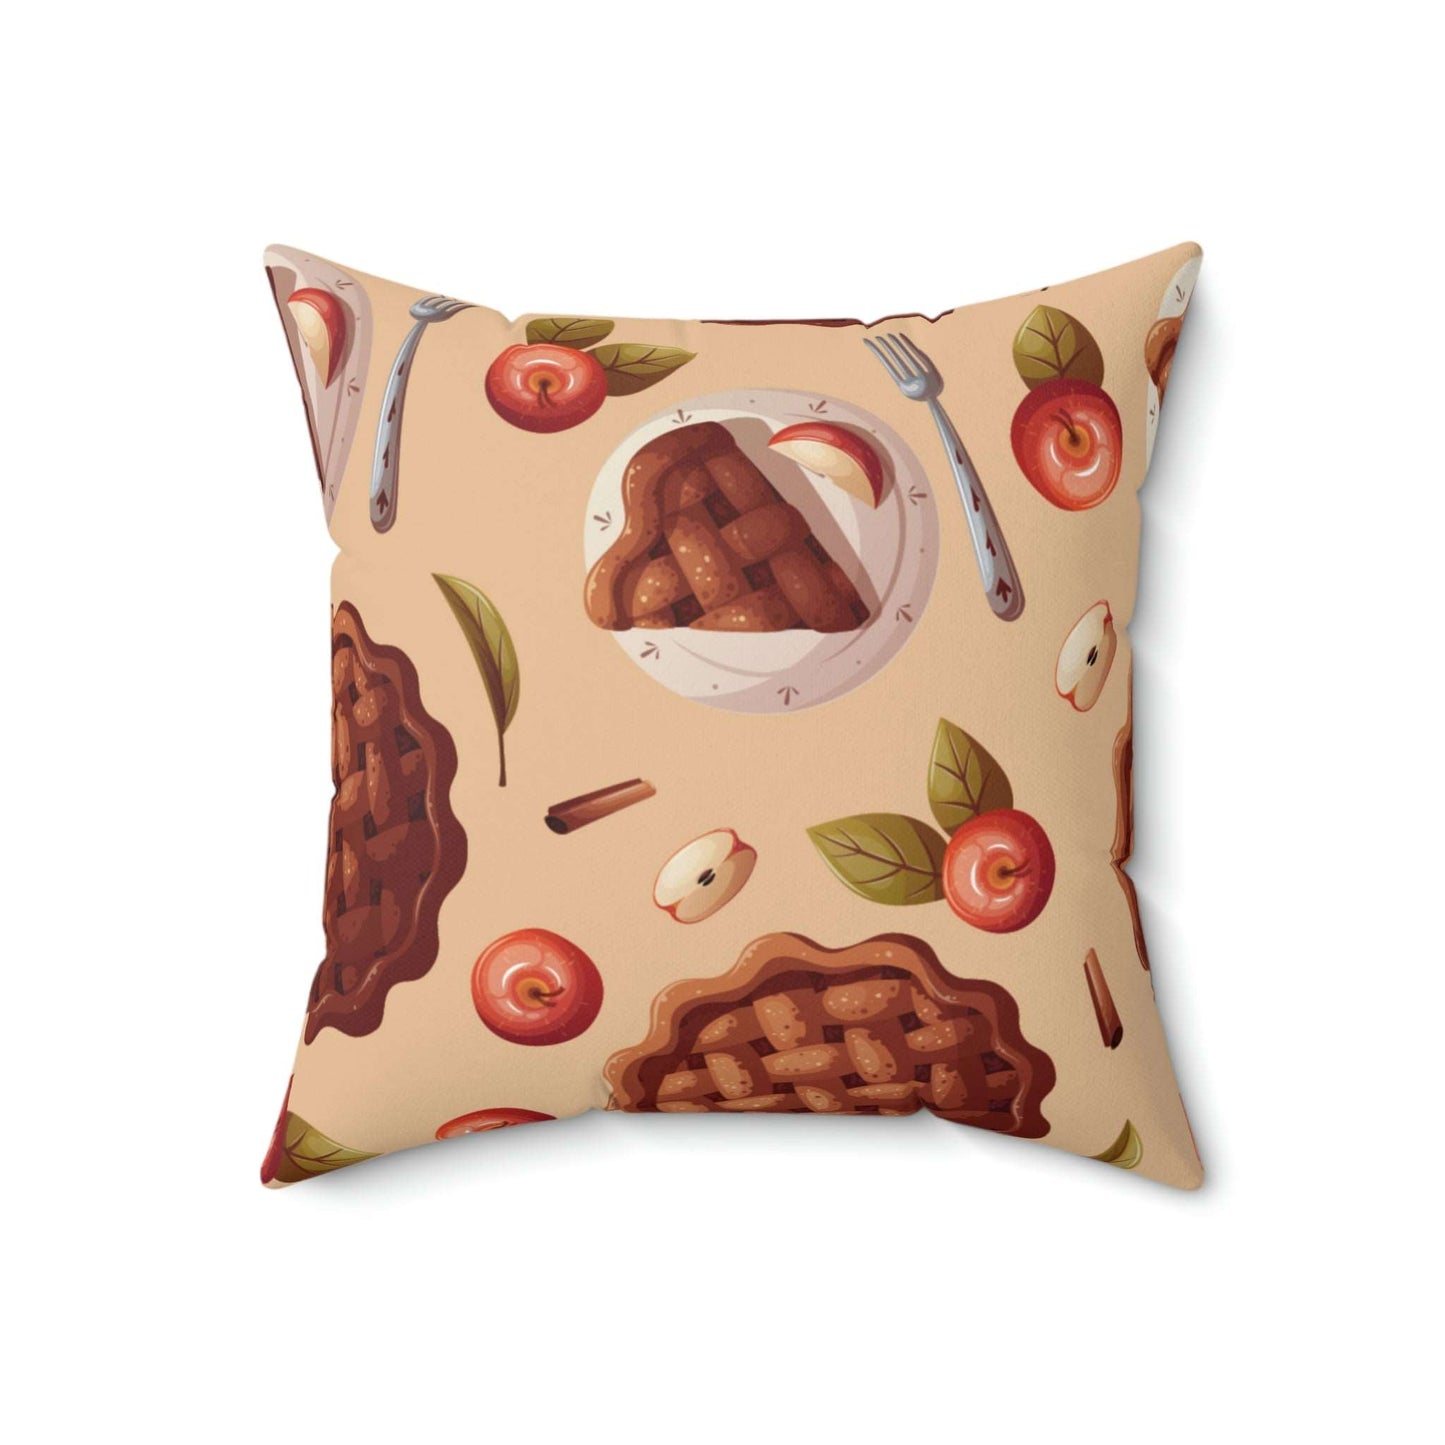 Chocolate Dessert Square Pillow Home Decor Pink Sweetheart